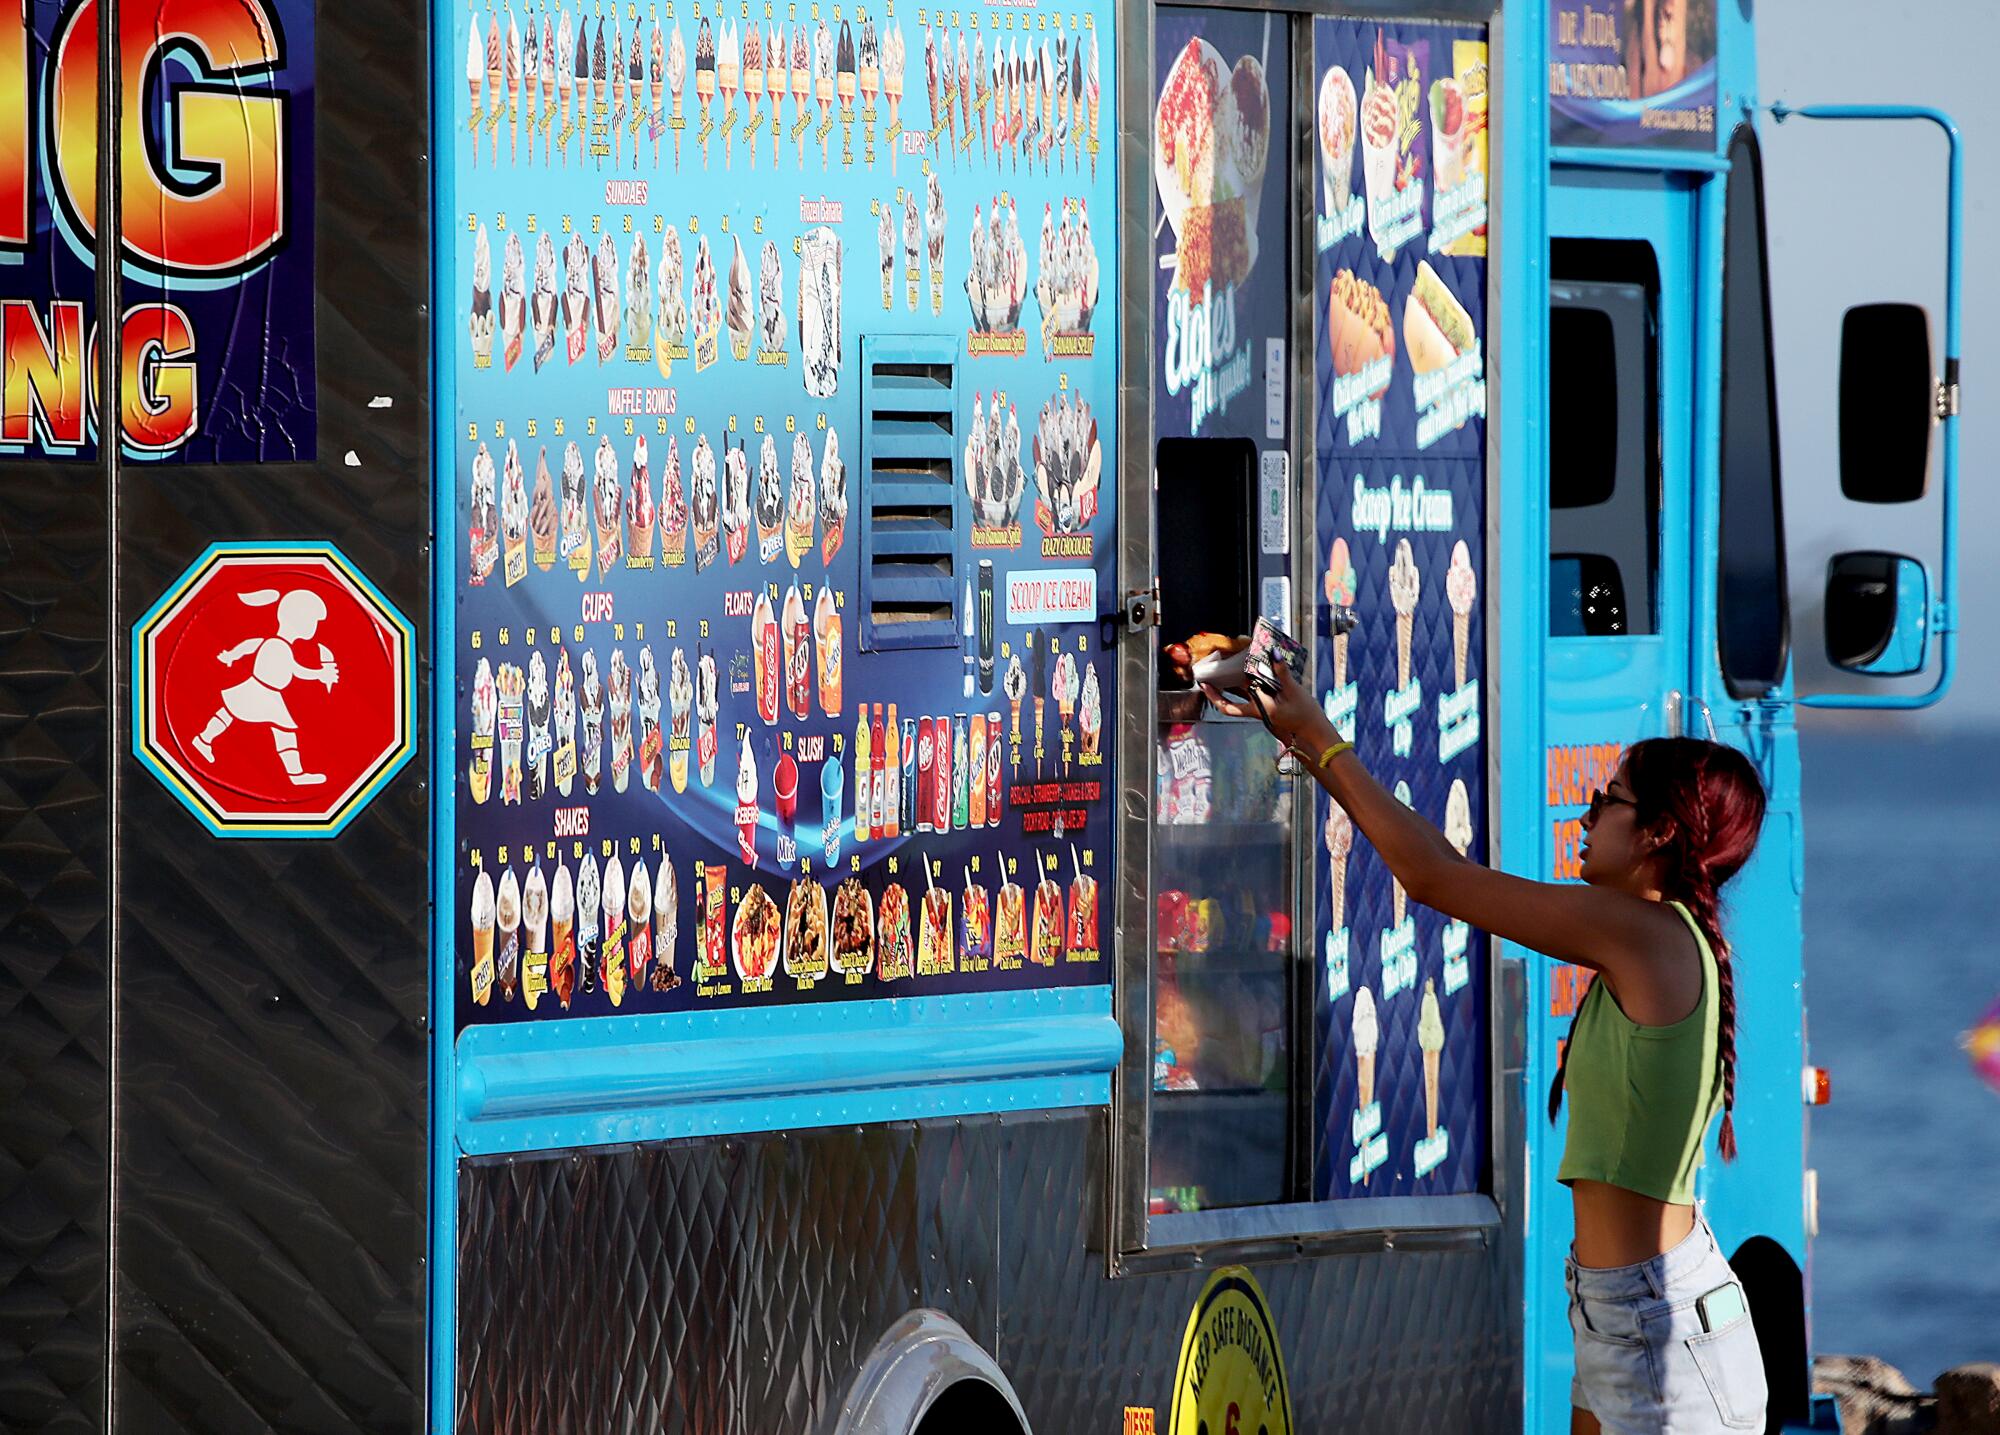 A beachgoer purchases refreshments from a food truck at Junipero Beach in Long Beach